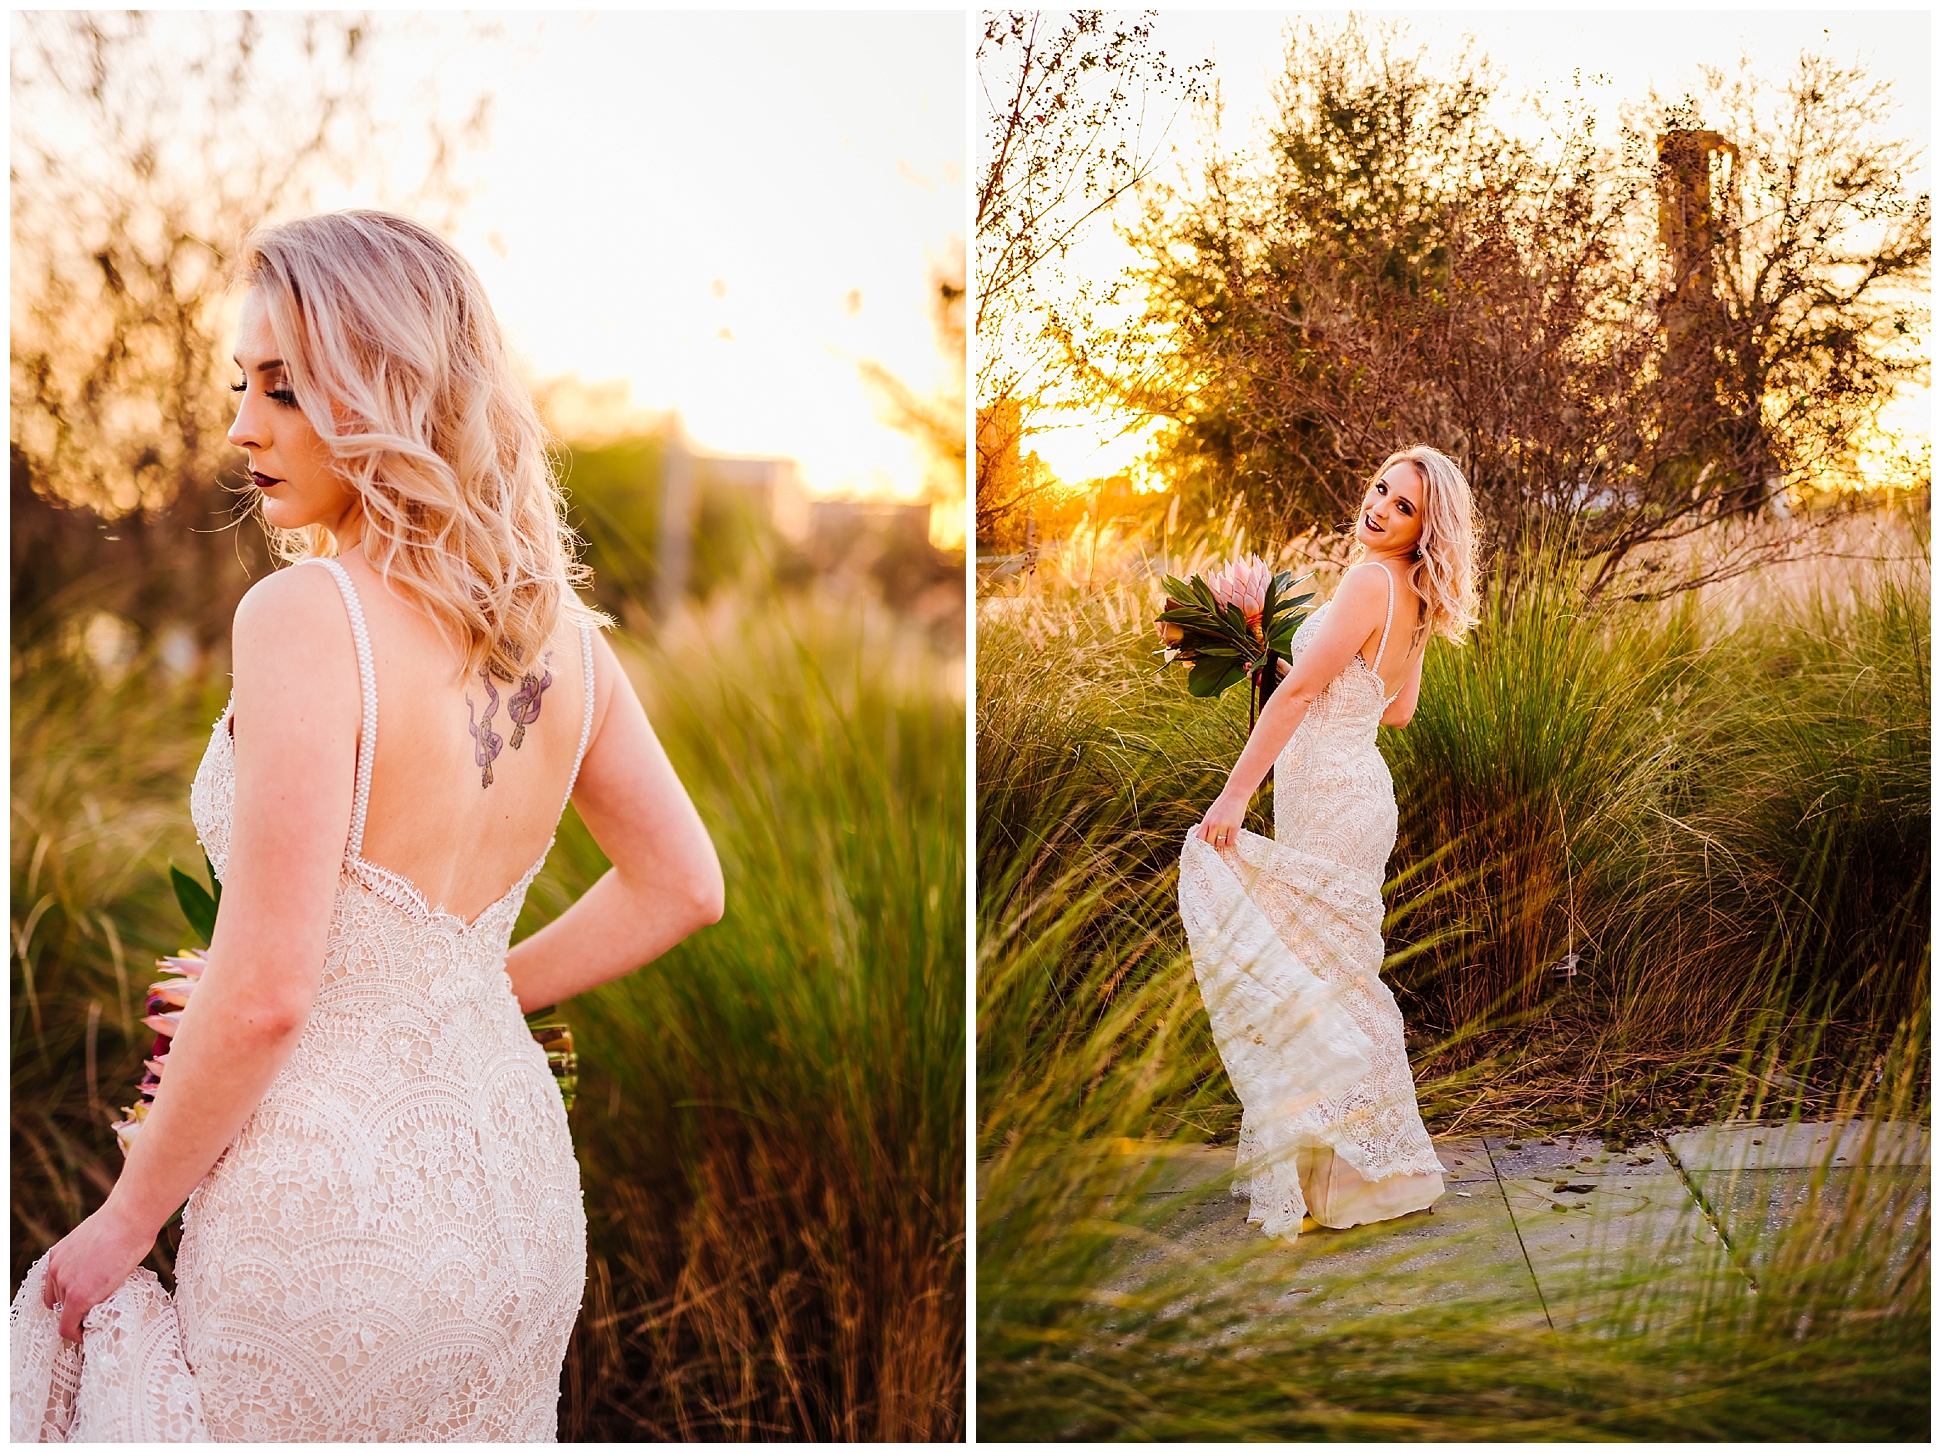 Tampa-theater-sunset-bridal session-protea-lace dress_0032.jpg